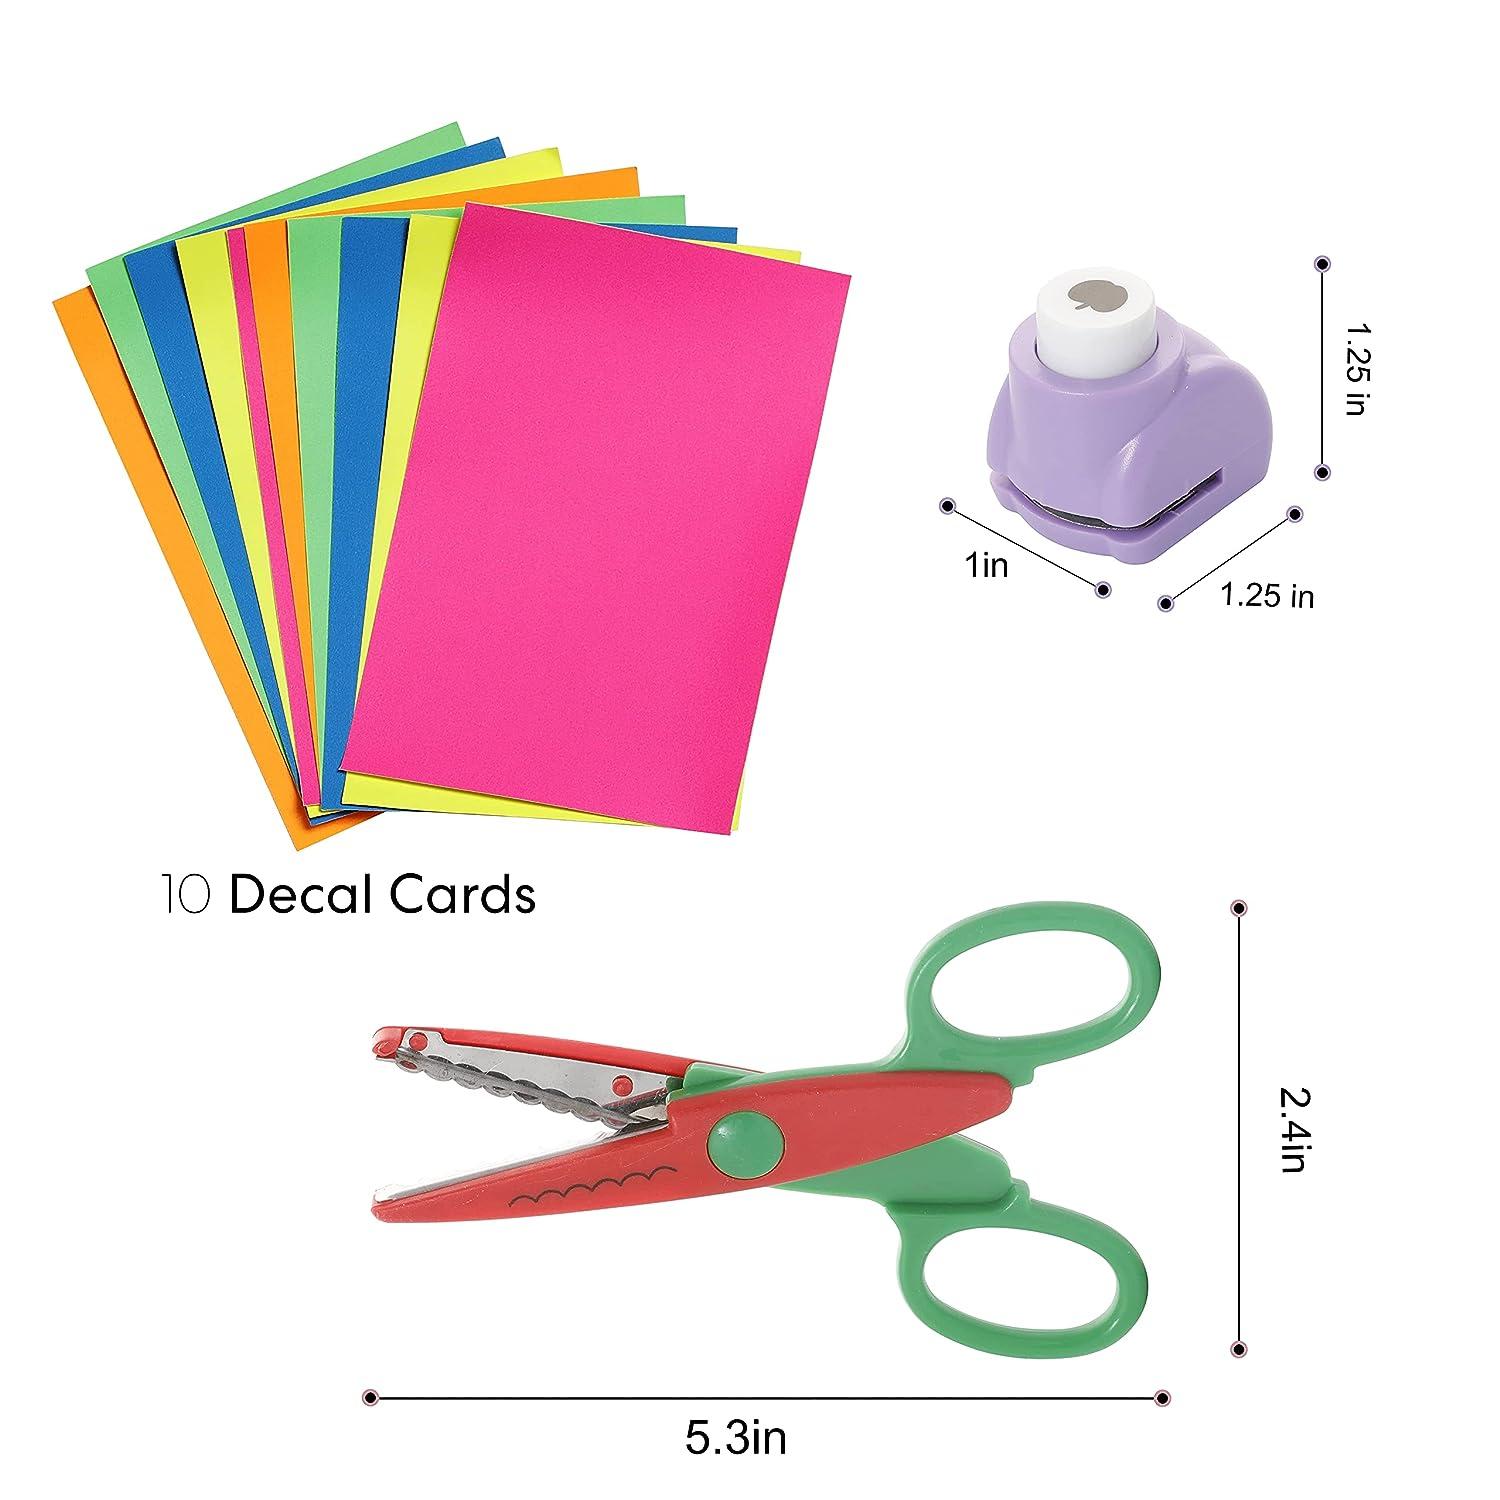 Incraftables 6pcs Decorative Pattern Edge Craft Scissors with 10pcs Small  Paper Hole Punch Shapes & 10pcs Colorful Papers. Best for Fun DIY  Scrapbooking & Crafting Projects for Kids & Adults